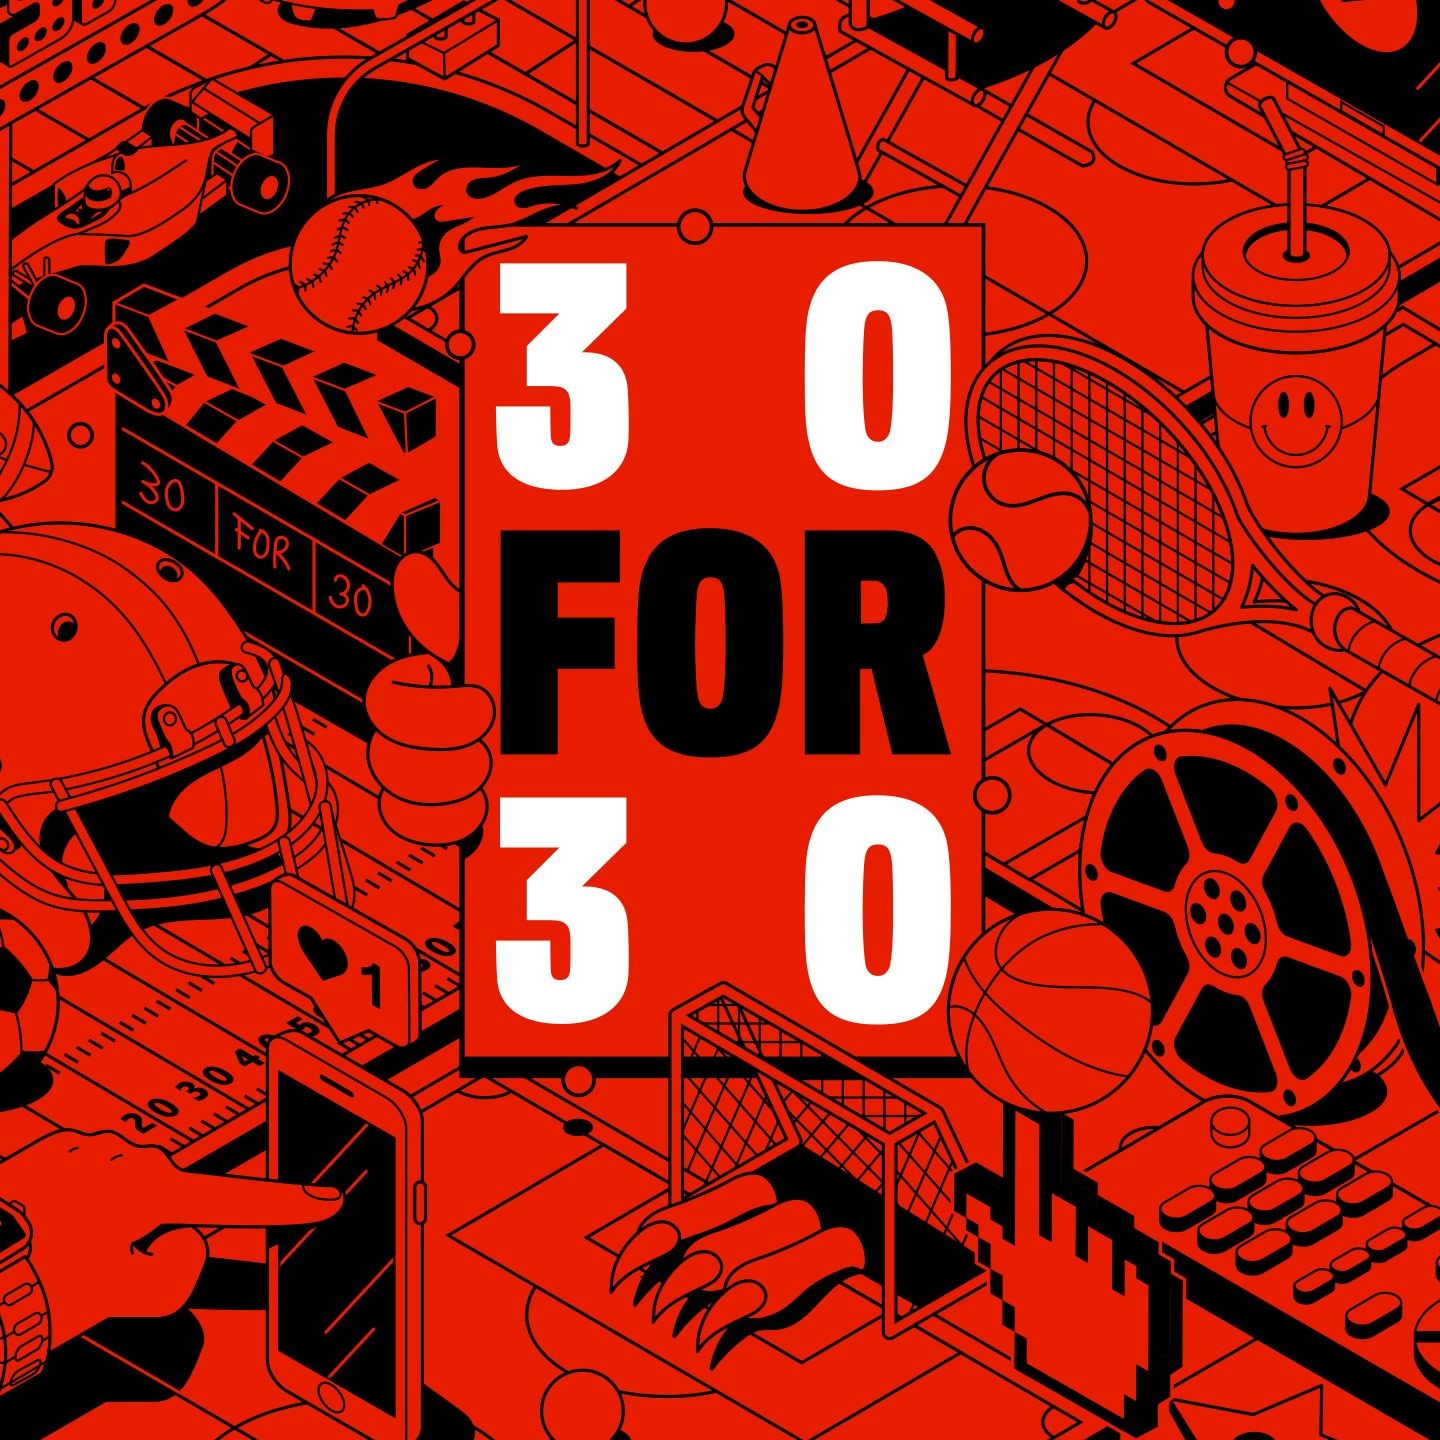 Congratulations to Words + Pictures on the Upcoming Premiere of their ESPN 30 for 30 Films